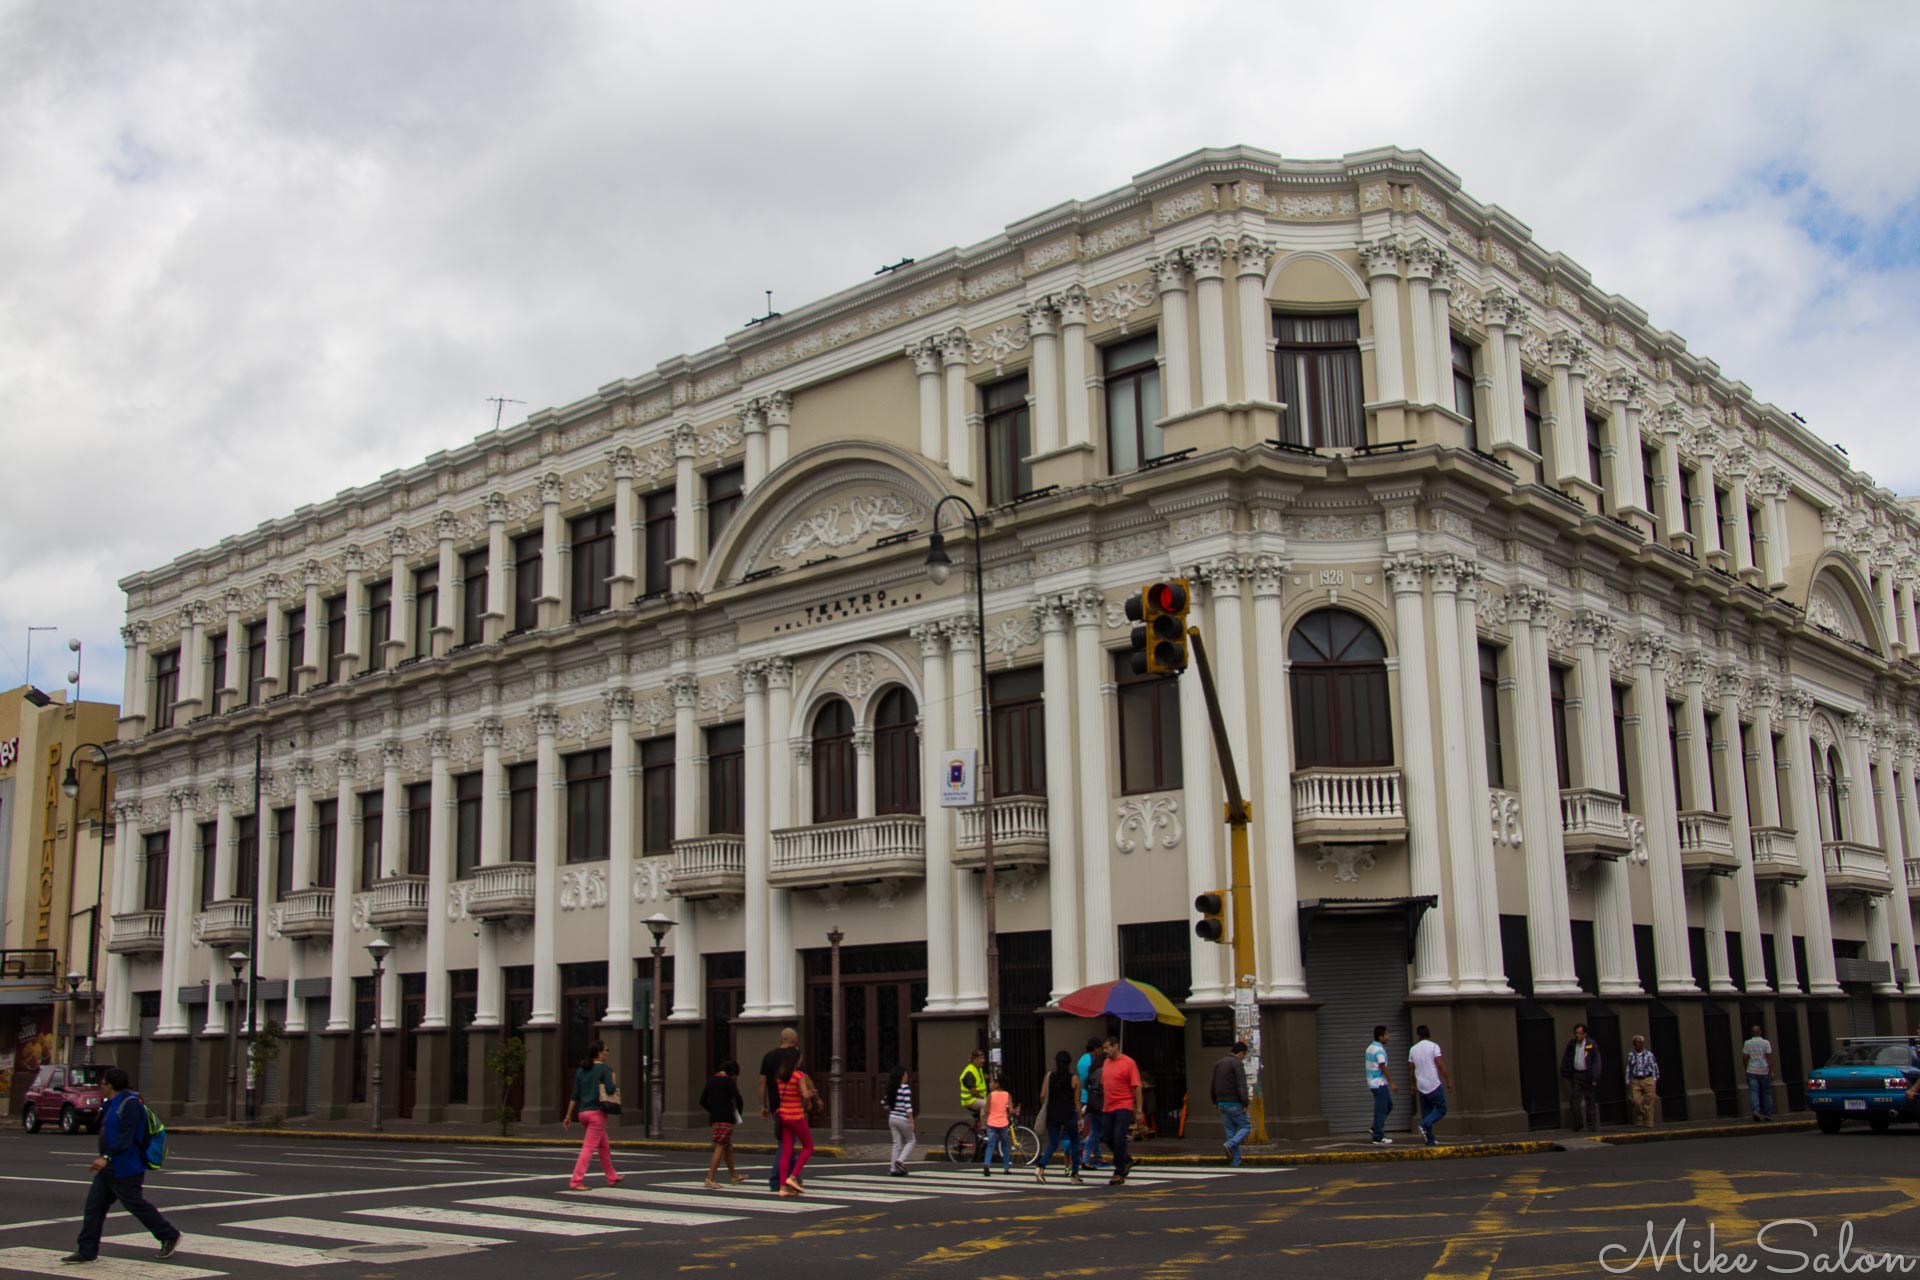 Tatro Melico Salazar of San Jose : A grey day cannot hide the grandeur of this 1928 beaux-arts style theatre named after a Costa Rican operatic tenor. (IMG_8126.jpg)<br>Camera: Canon EOS 60D